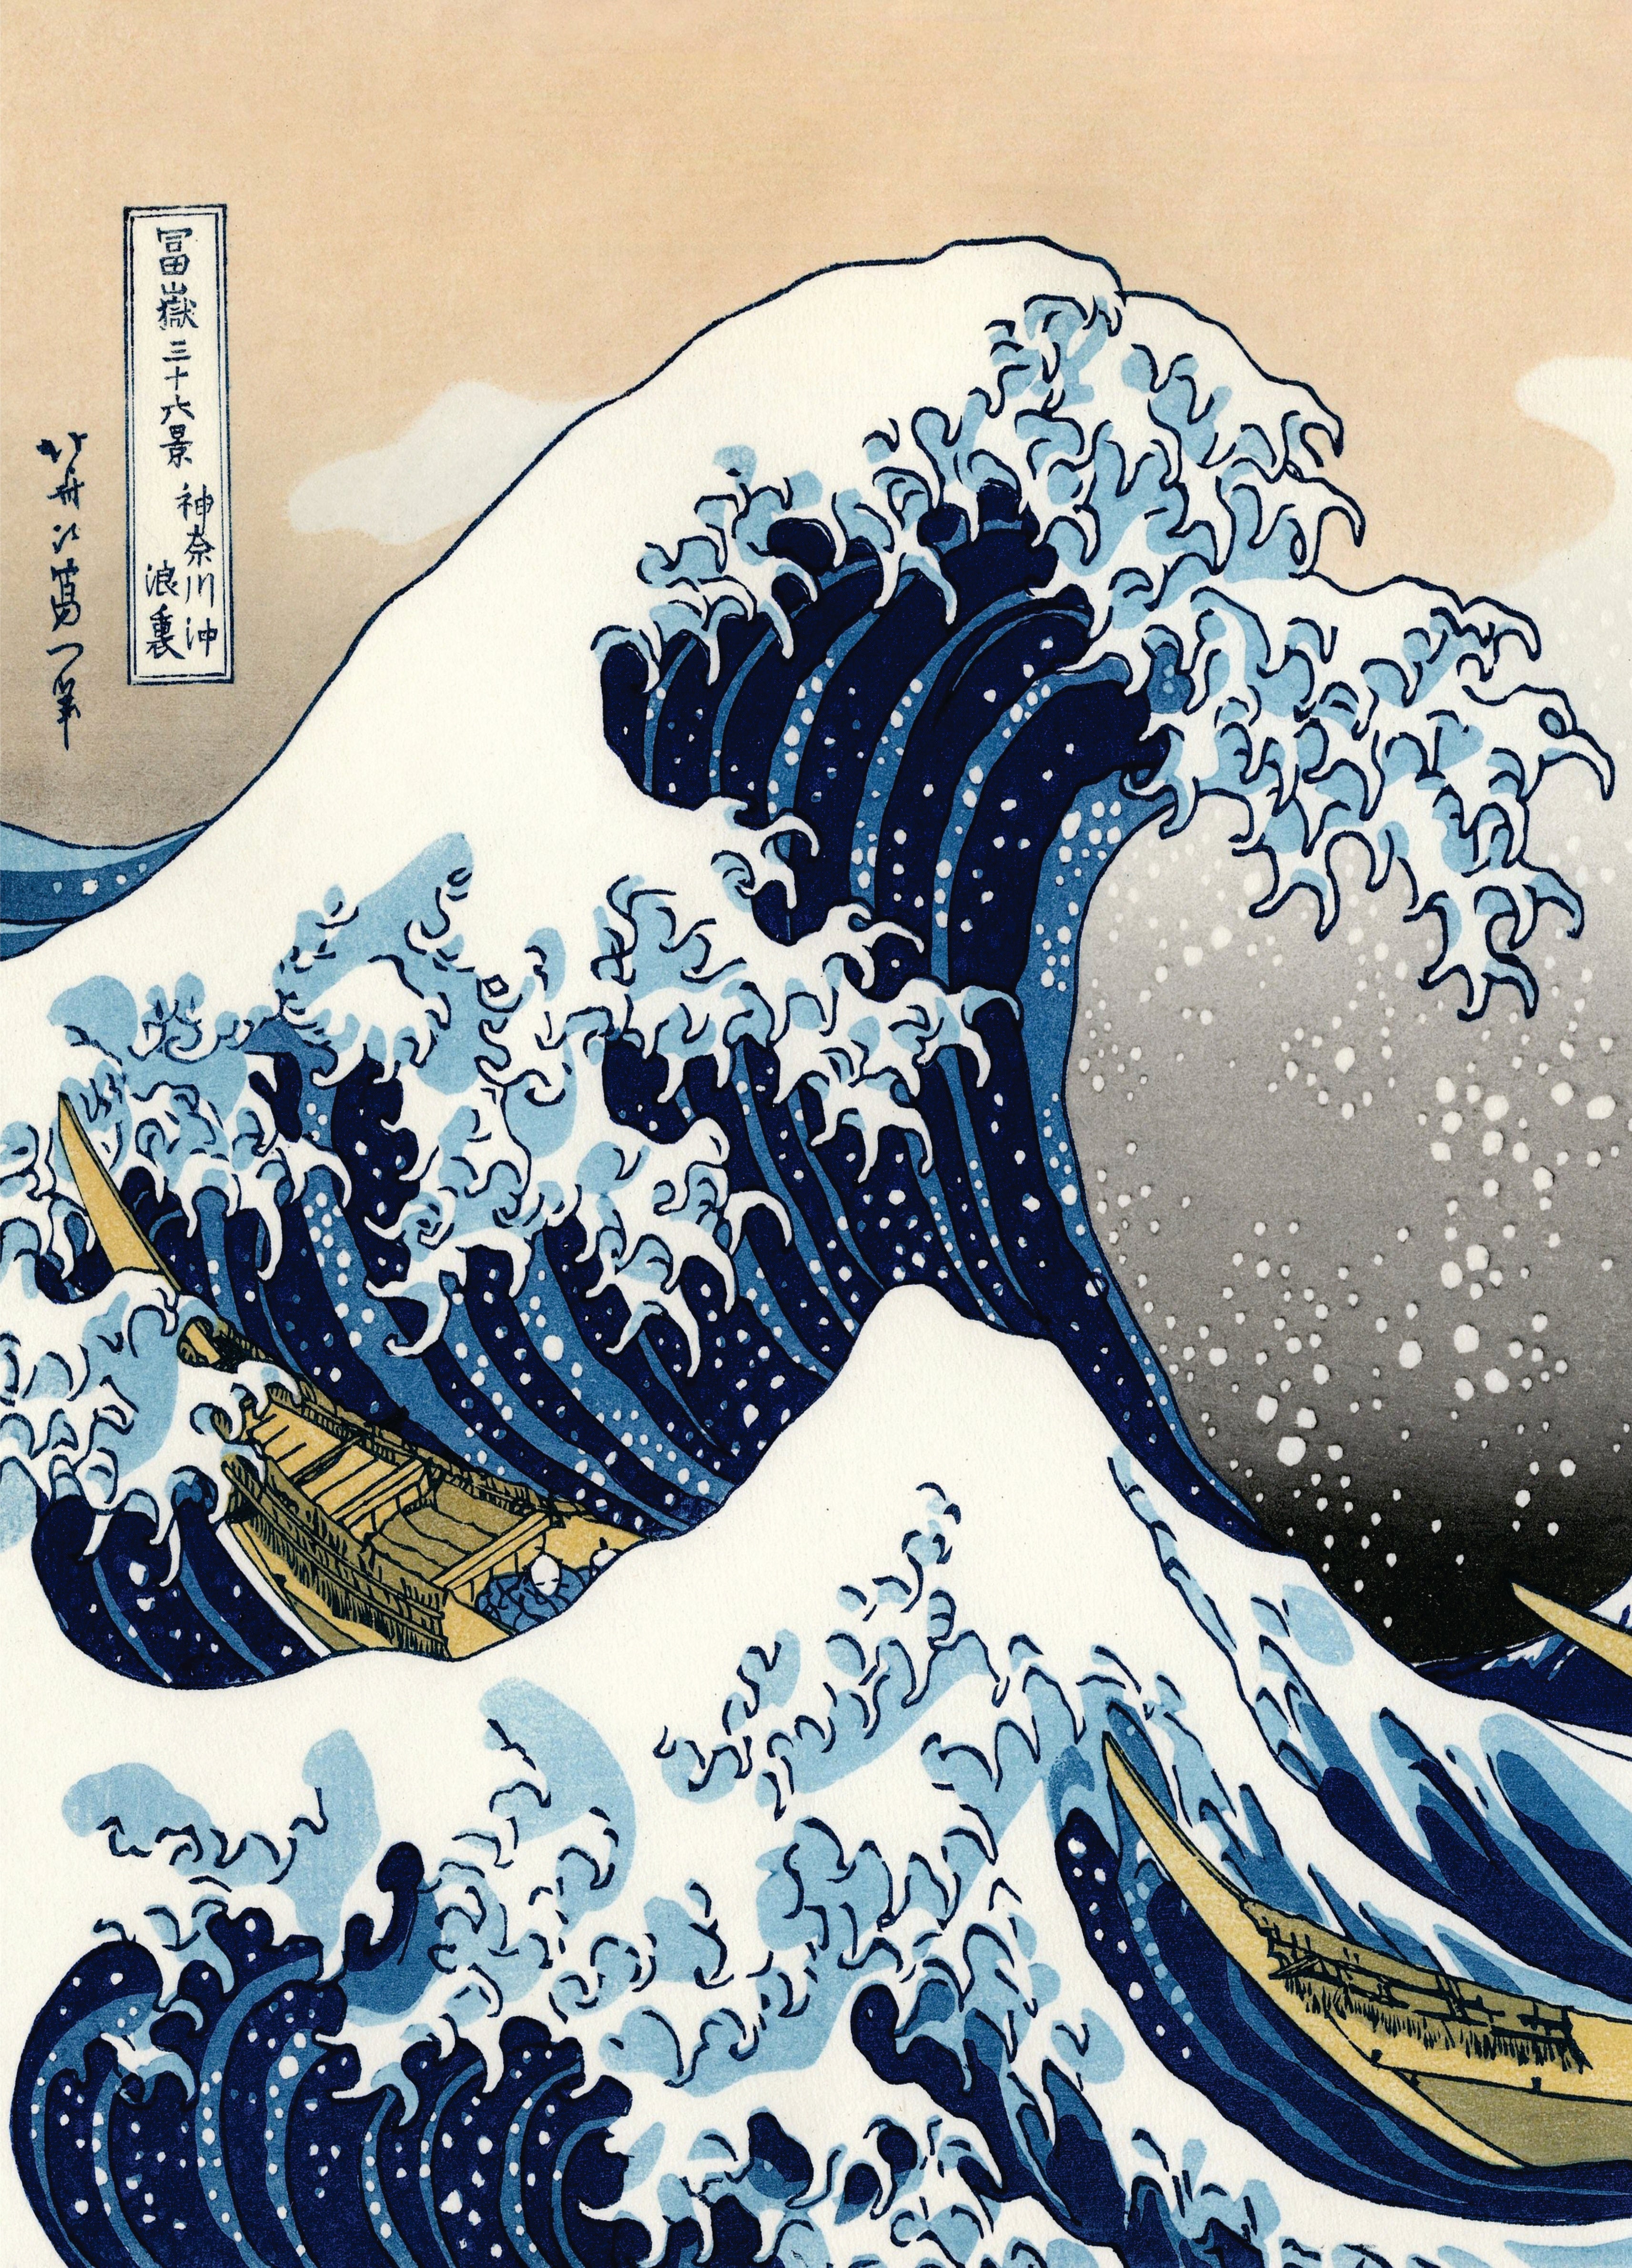 The Great Wave Rice Paper- Unique Printed Mulberry Paper Art Image 36gsm